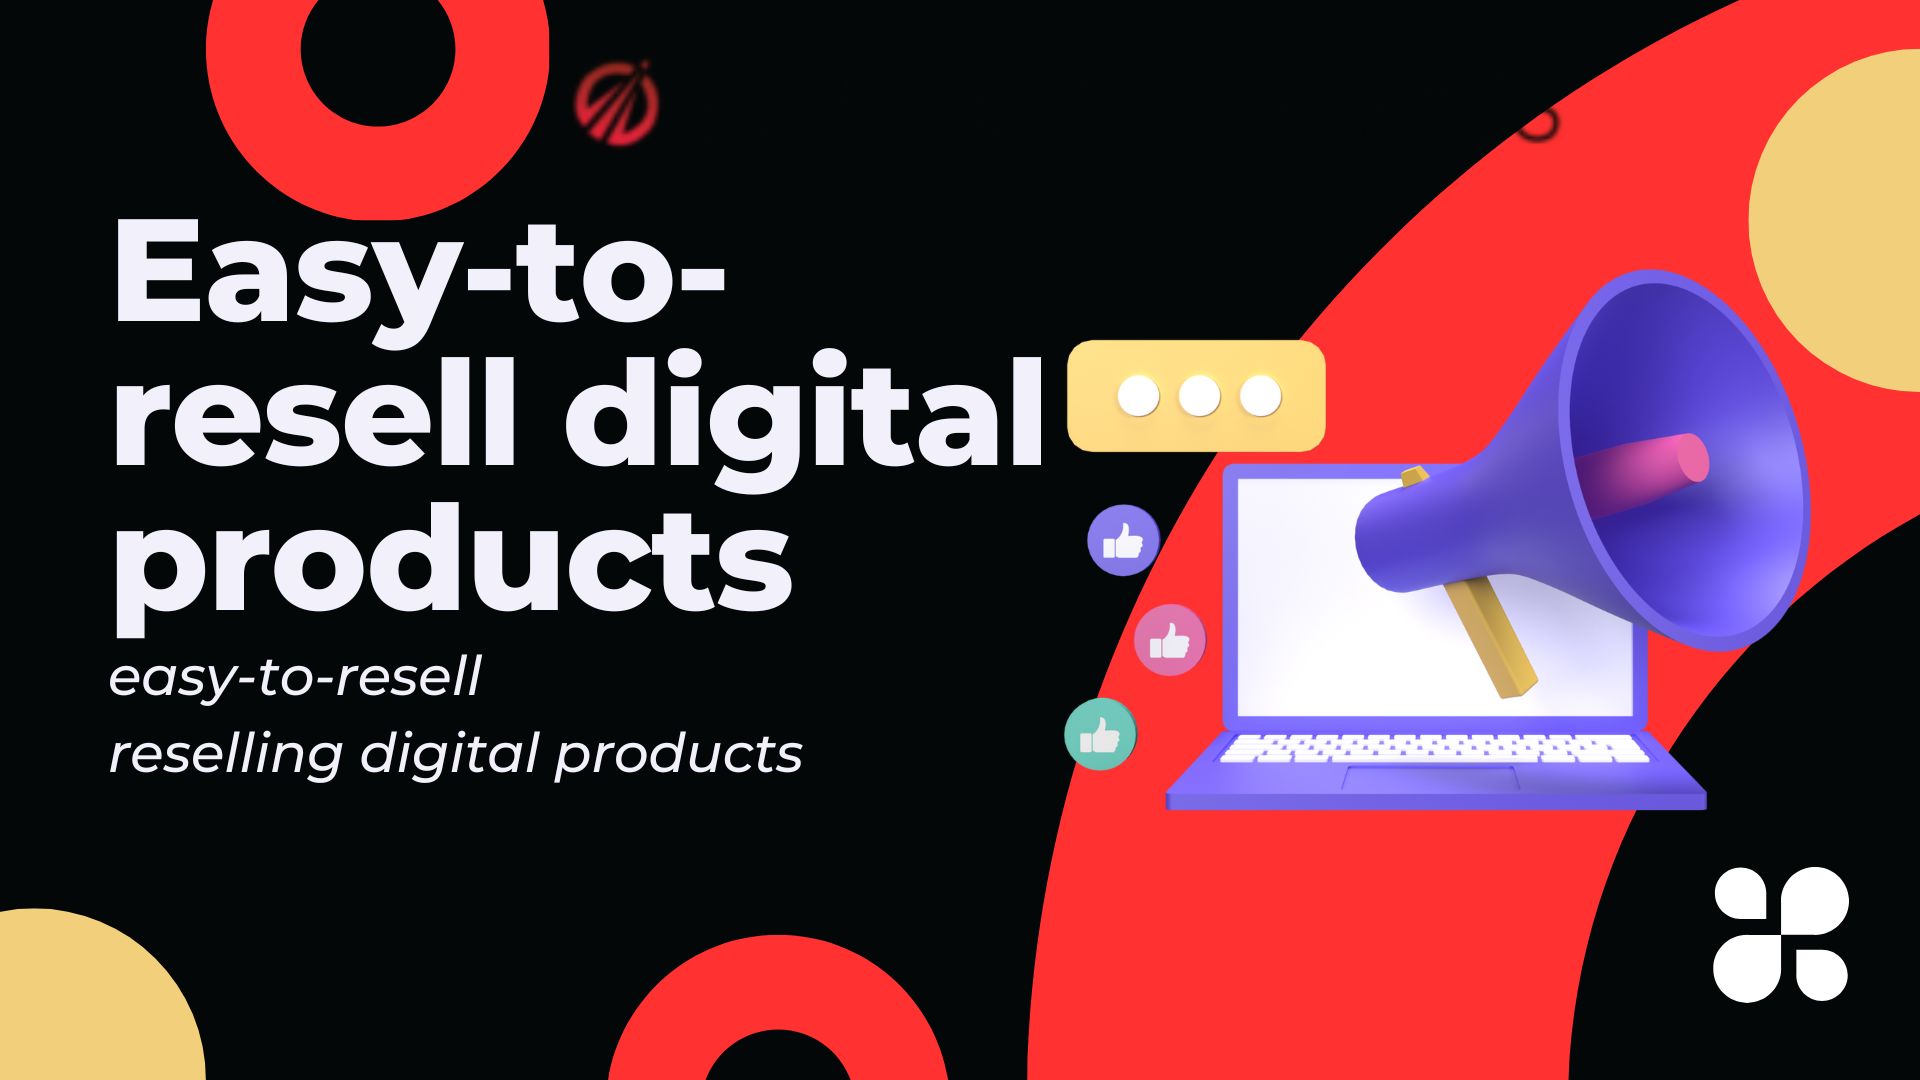 Reselling digital products